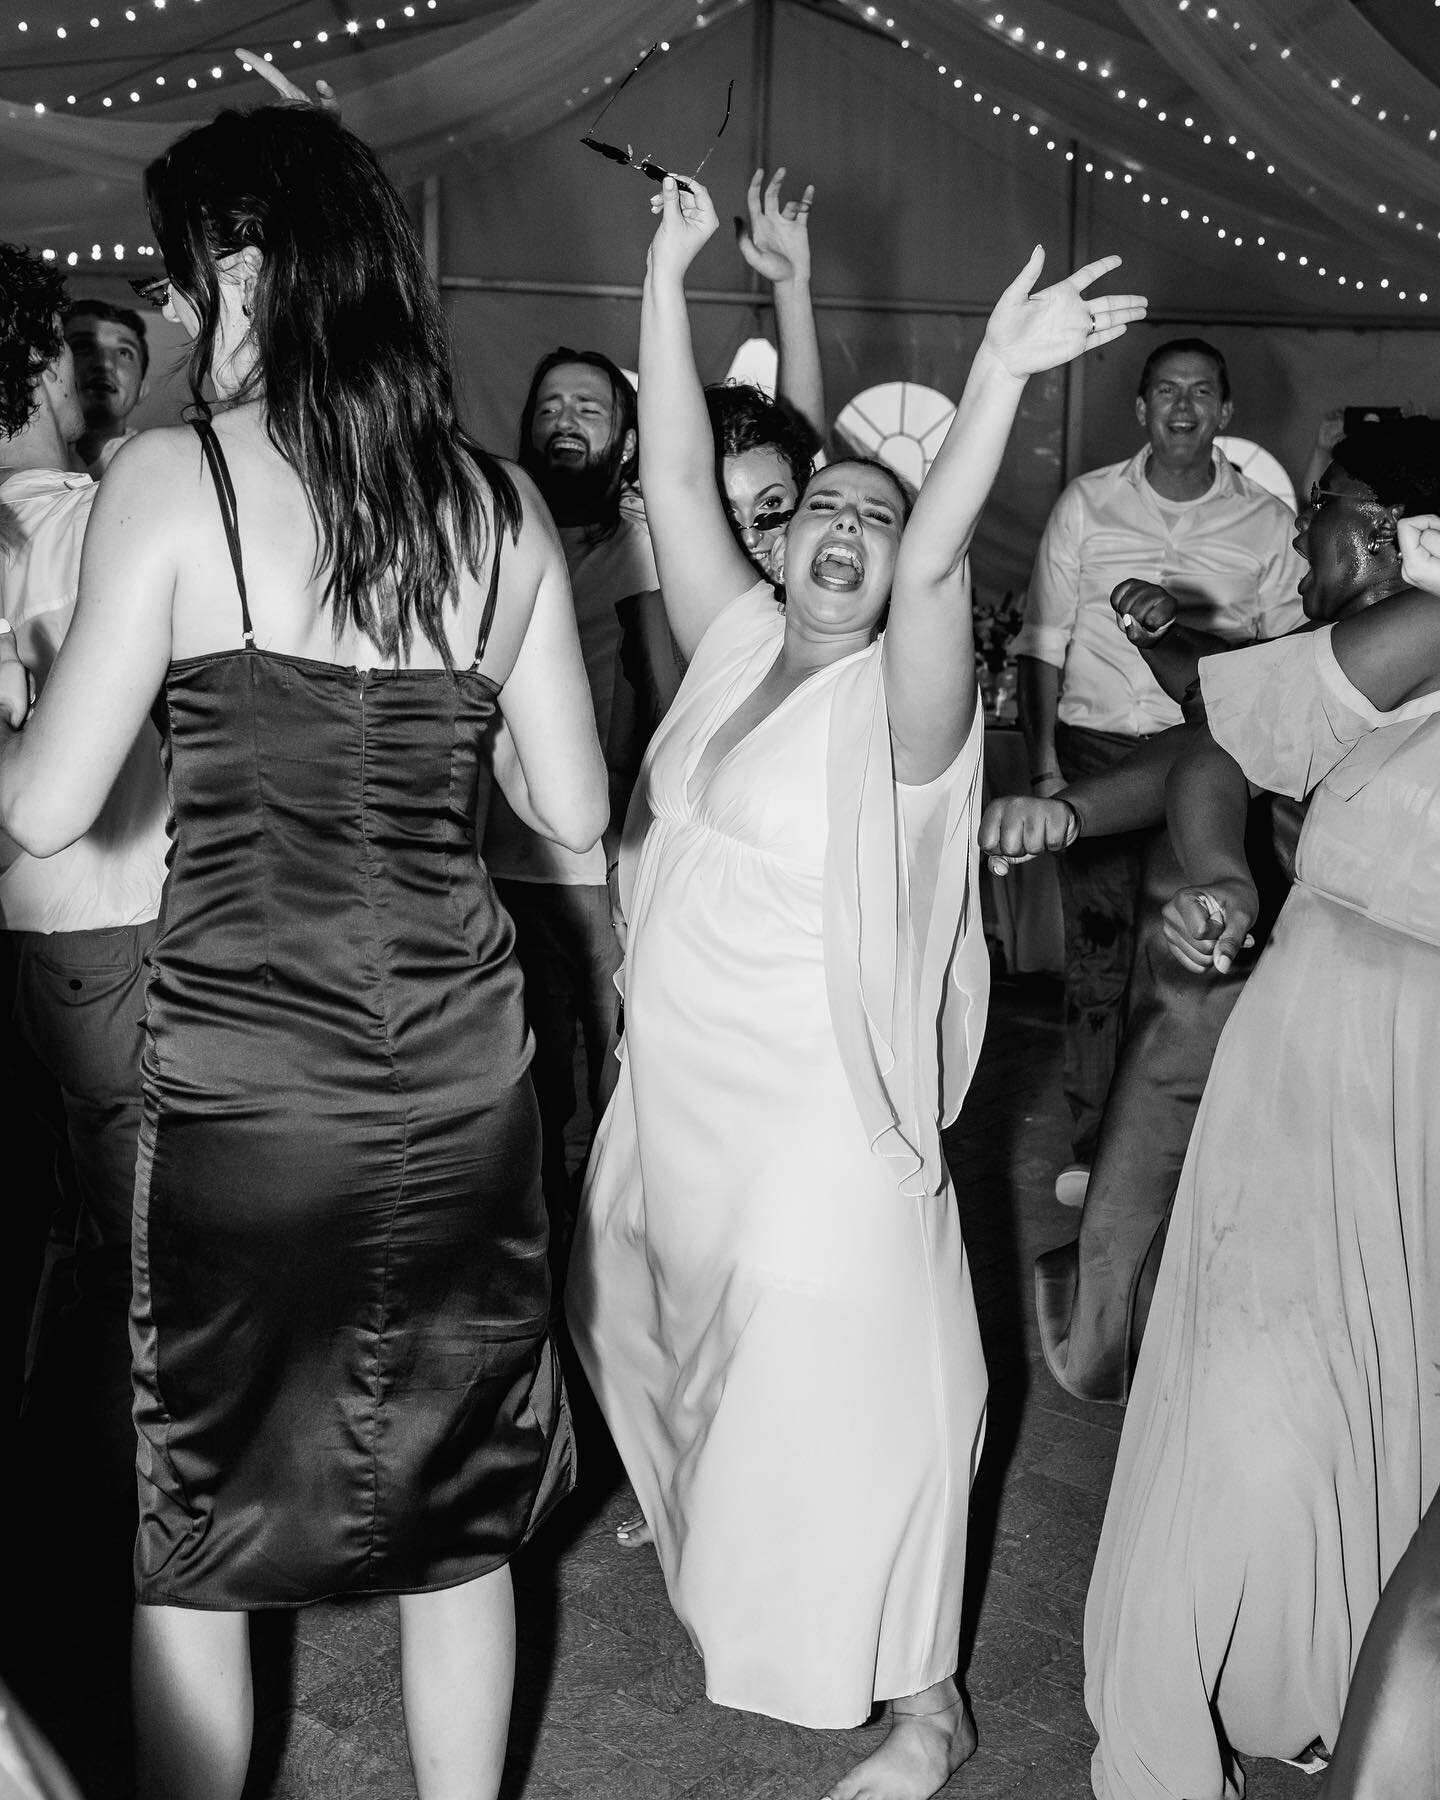 Finishing up this wedding + had to share some really fun pics with you all. 

Ever wondered how to get fun photos of your dance?

✨ Hire a DJ 👏🏻 
Skip the iPod playlist and hire a DJ. They usually know how to get people moving. 
 
✨ Have a smaller 